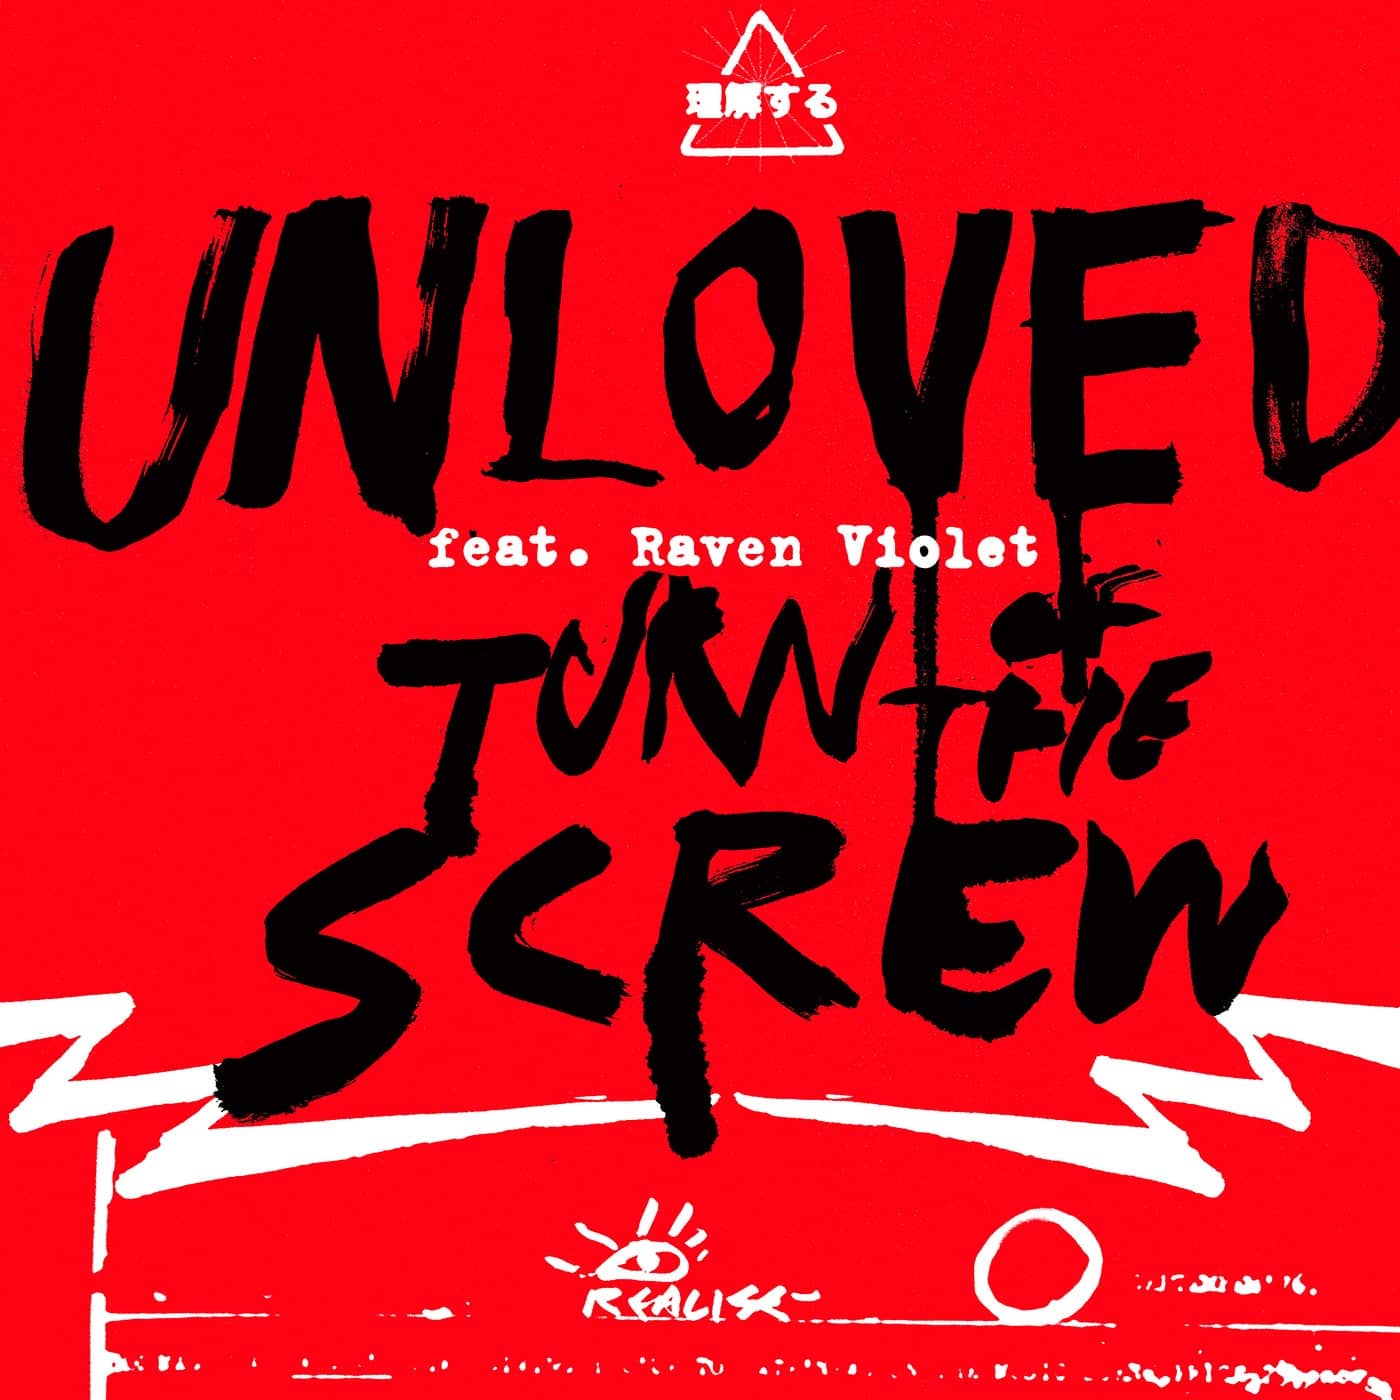 Download Unloved, Raven Violet - Turn of the screw remixes feat. Raven Violet on Electrobuzz